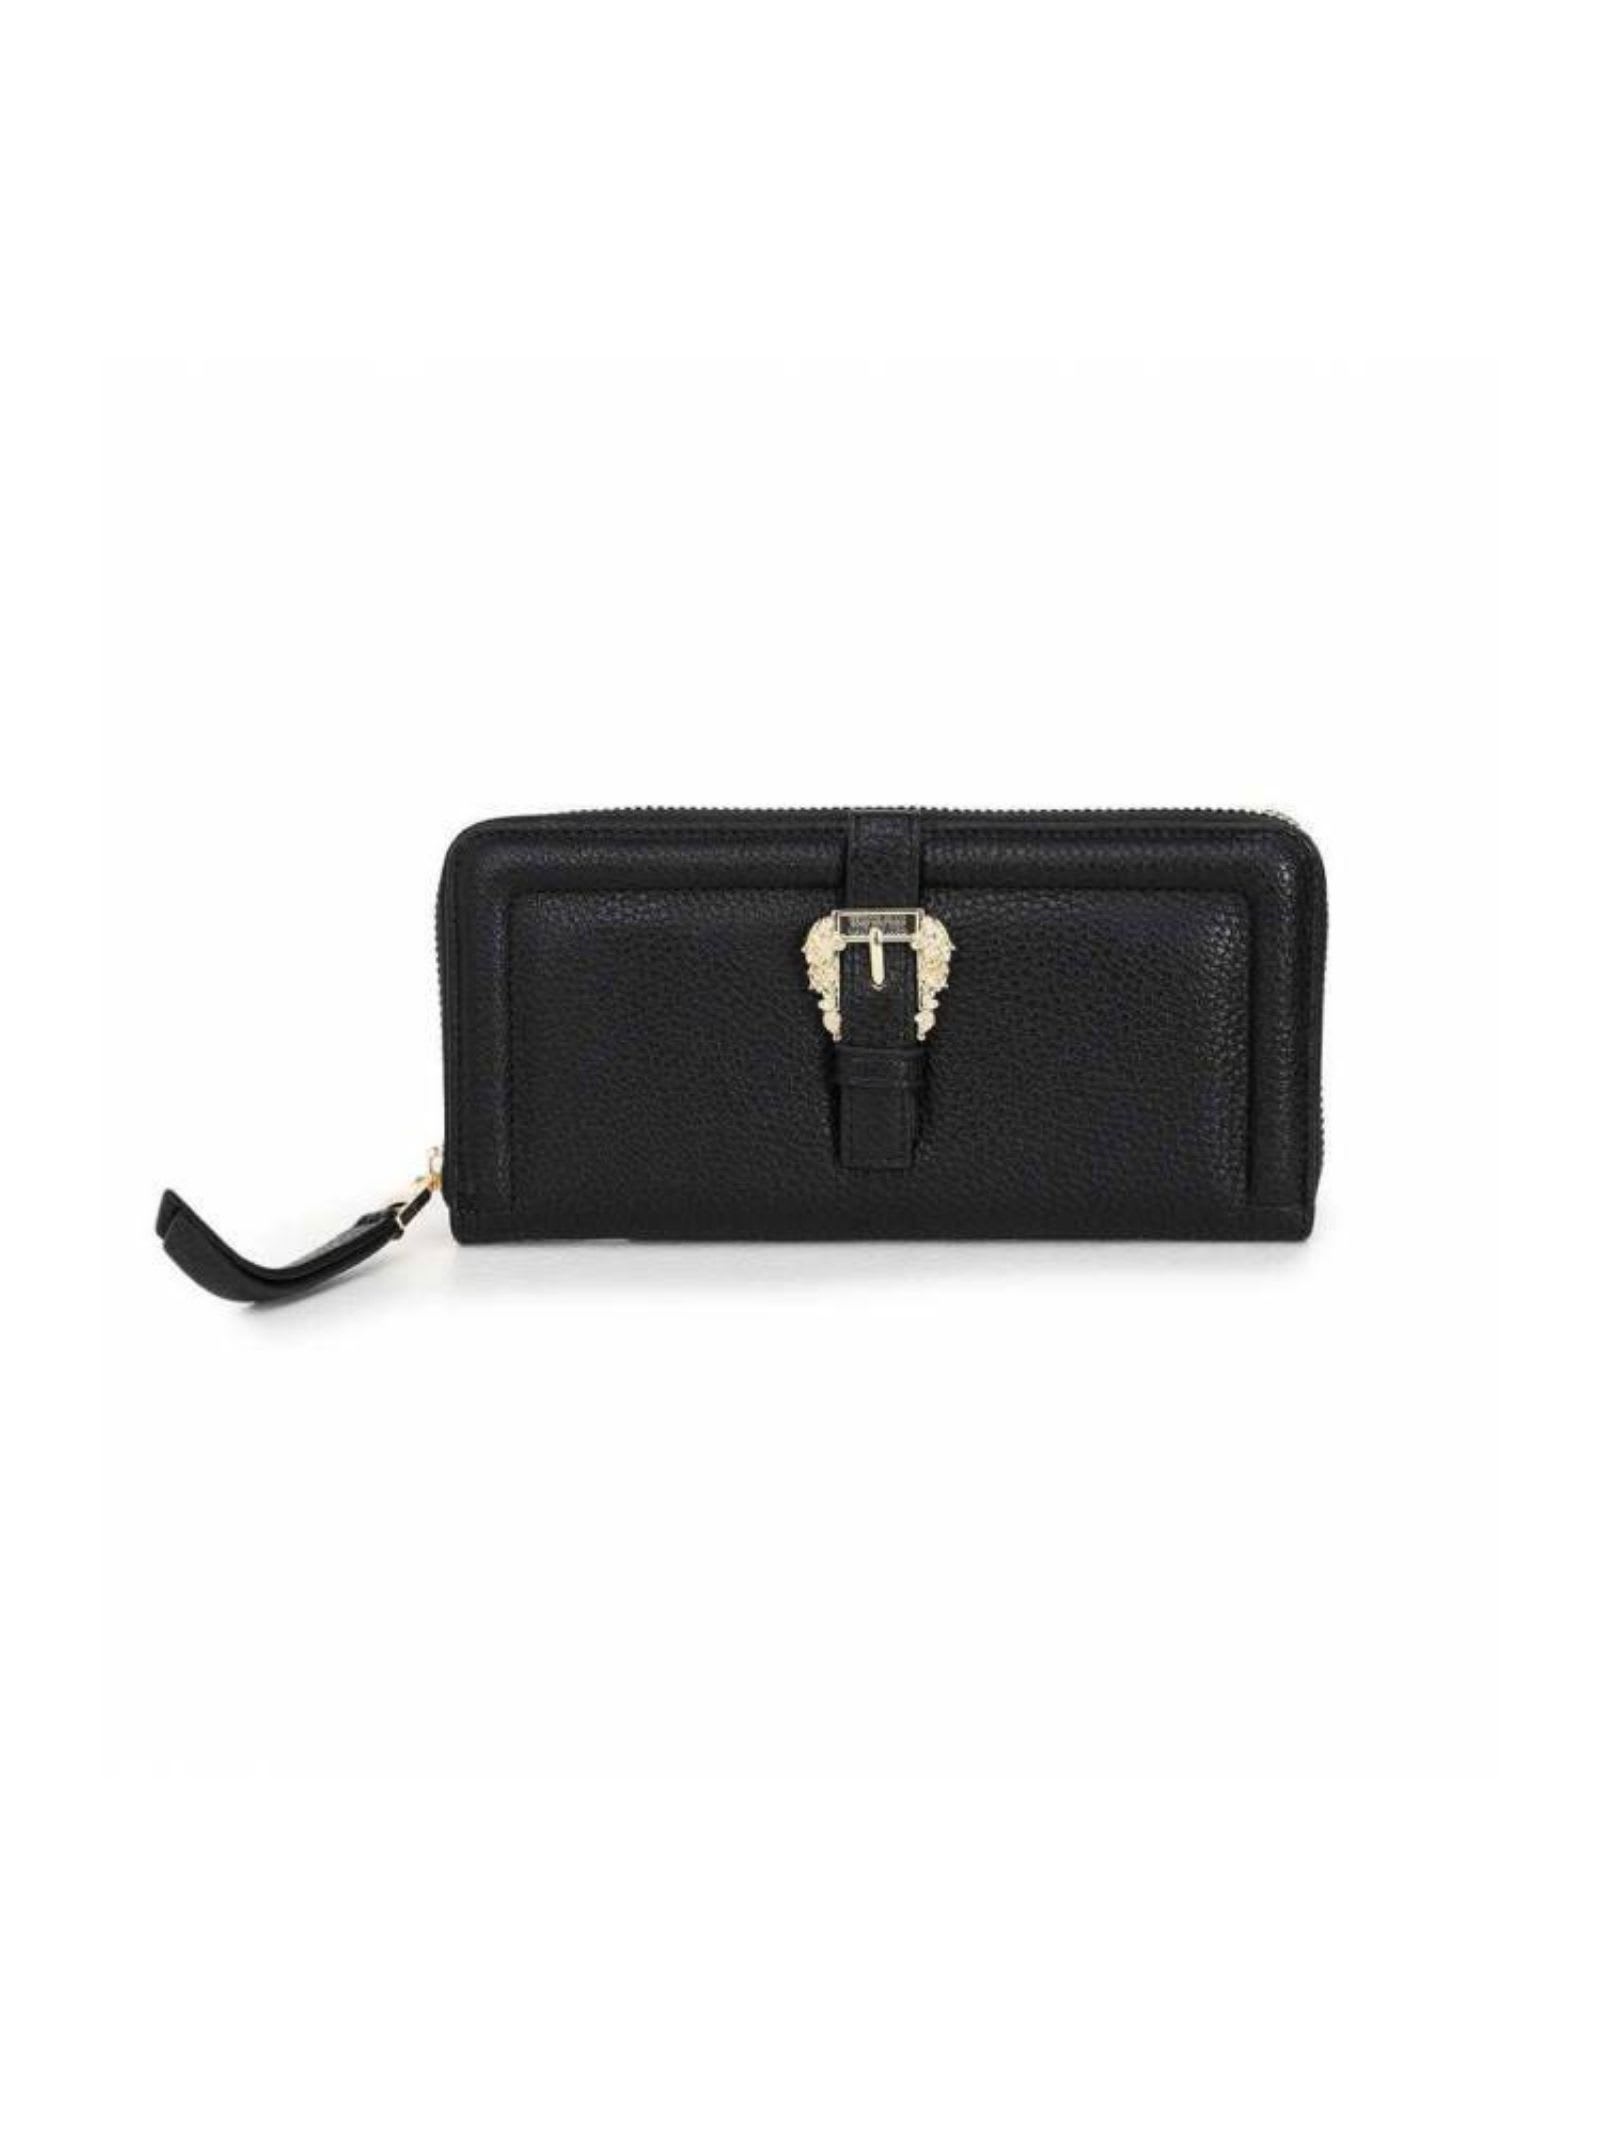 Shop Versace Jeans Couture Wallet In Black